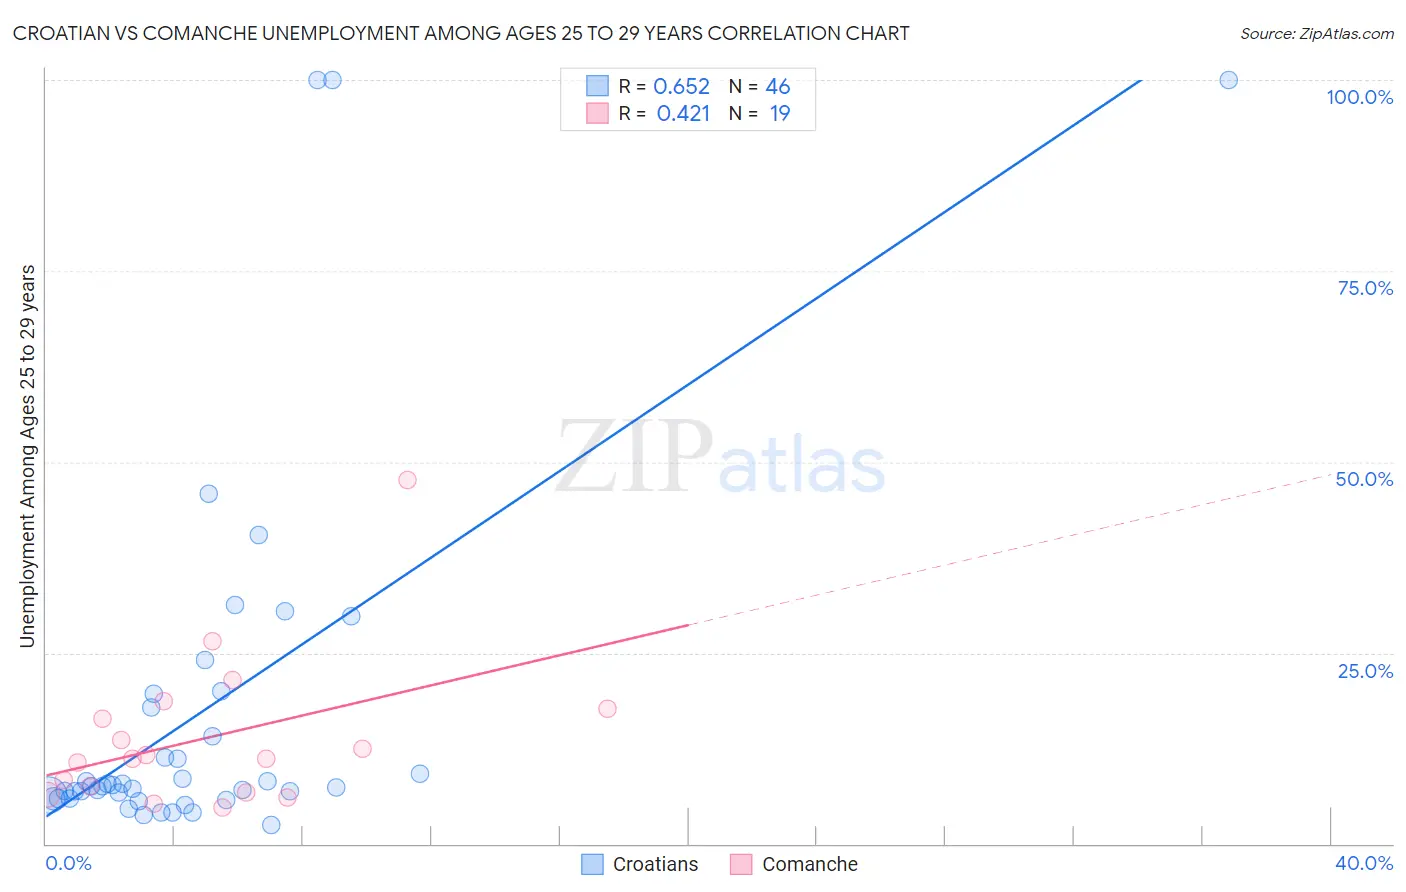 Croatian vs Comanche Unemployment Among Ages 25 to 29 years